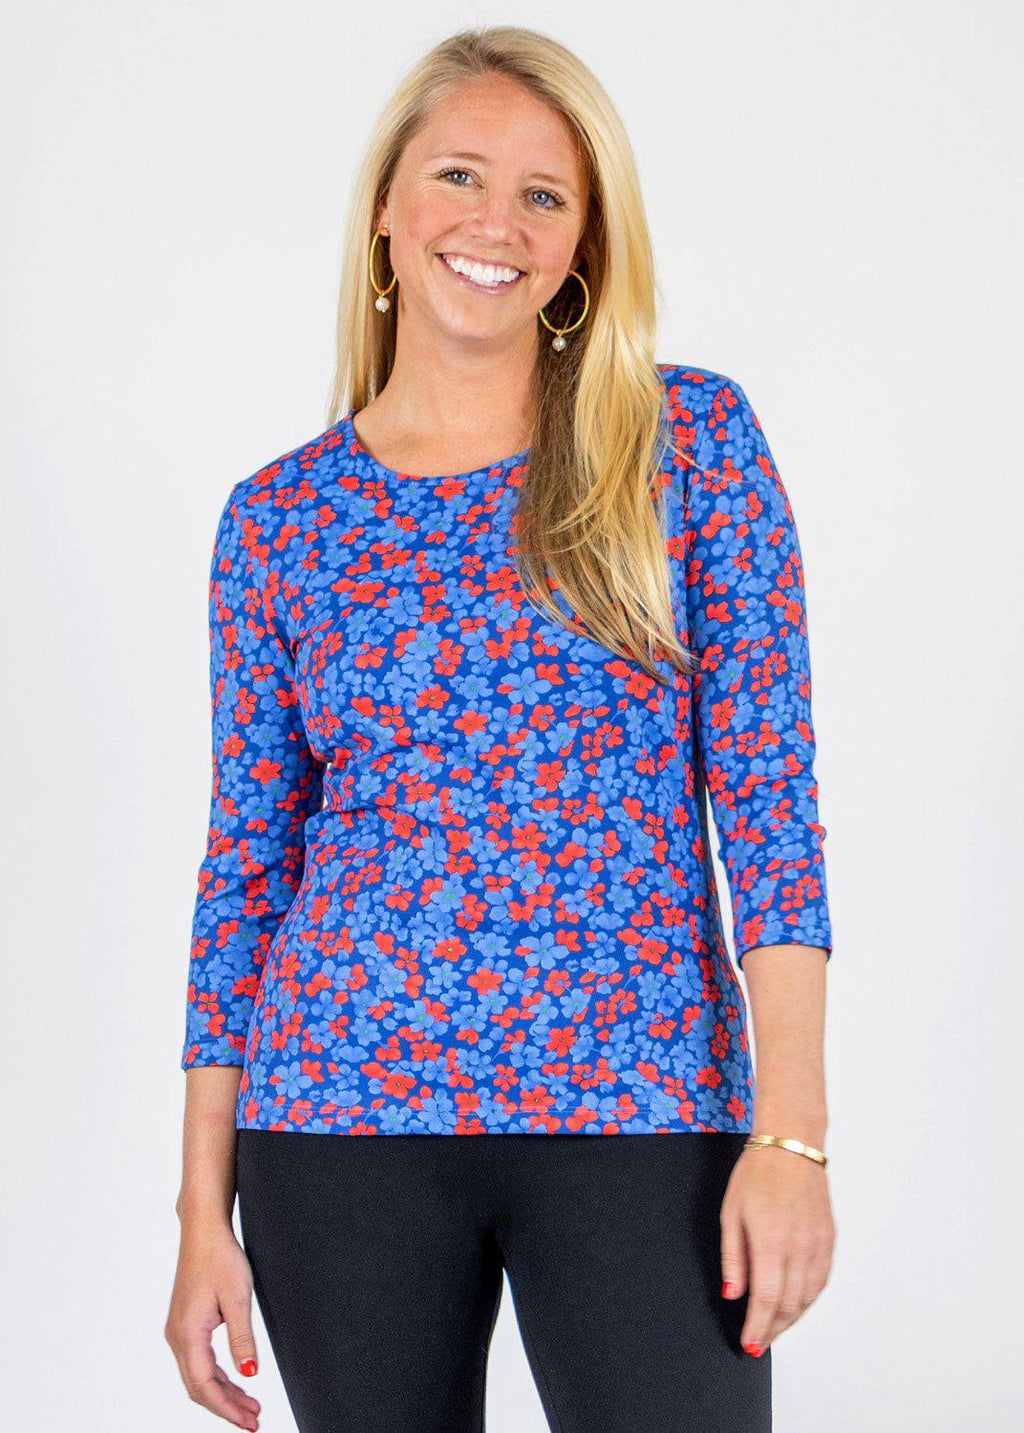 Blue & Red Crew Tee 3/4 Sleeve Top in a Floral Print